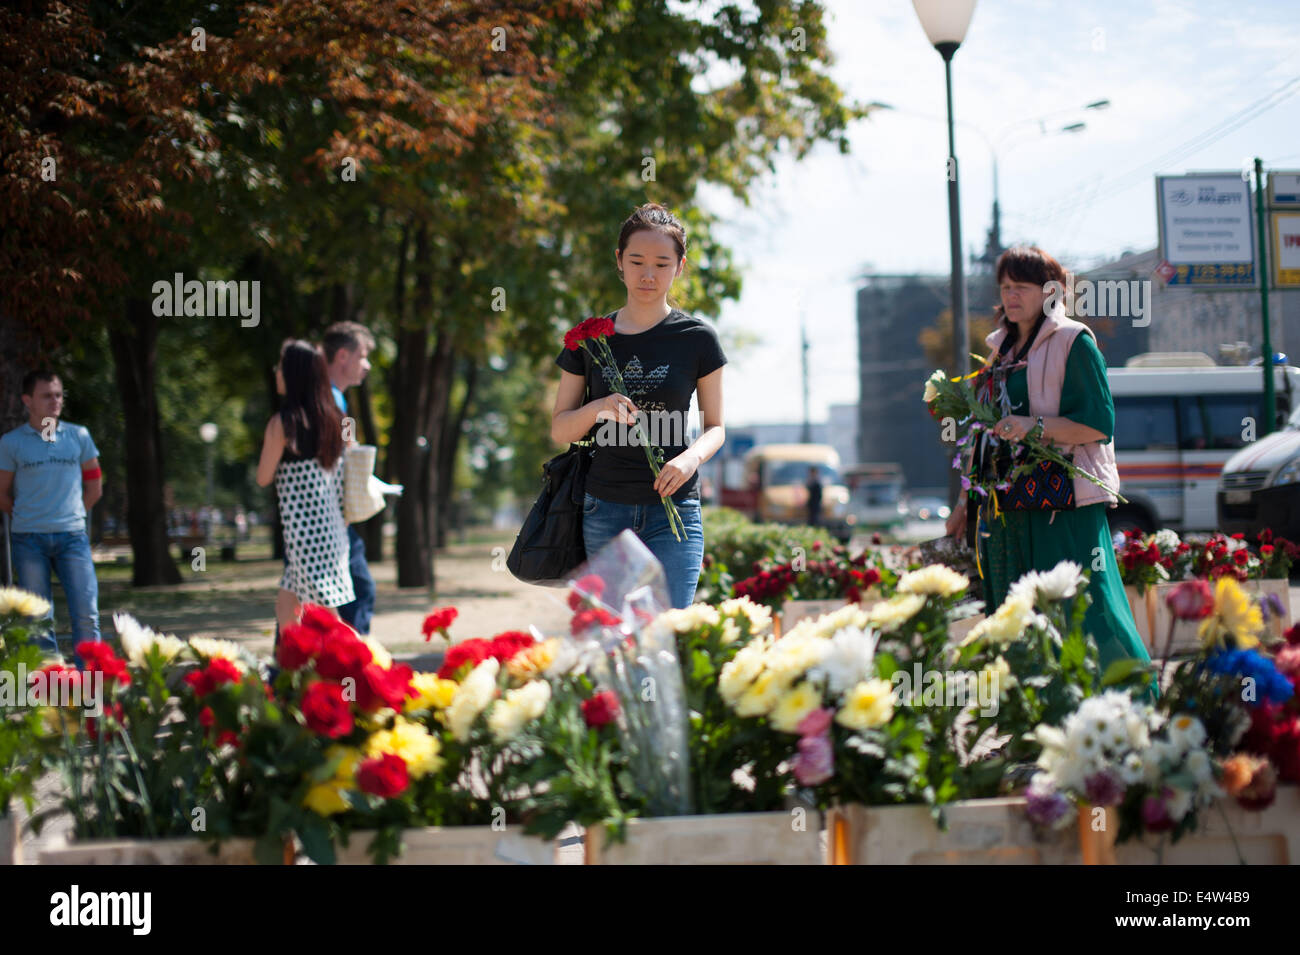 Moscow, Russia. 17th July, 2014. A girl lays flowers for the victims of Moscow's subway derailment to convey her condolences in Moscow, Russia, July 17, 2014. At least 22 people died and hundreds more were injured in a subway train derailment in Moscow on Tuesday. Credit:  Dai Tianfang/Xinhua/Alamy Live News Stock Photo